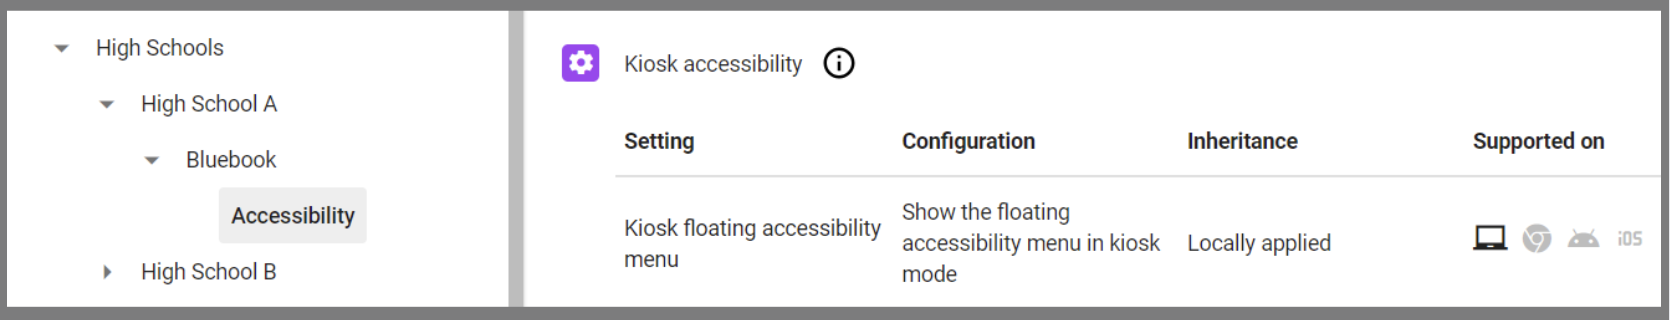 Figure 1 shows a Google Admin console with the floating accessibility menu enabled only for devices in High School A > Bluebook > Accessibility.